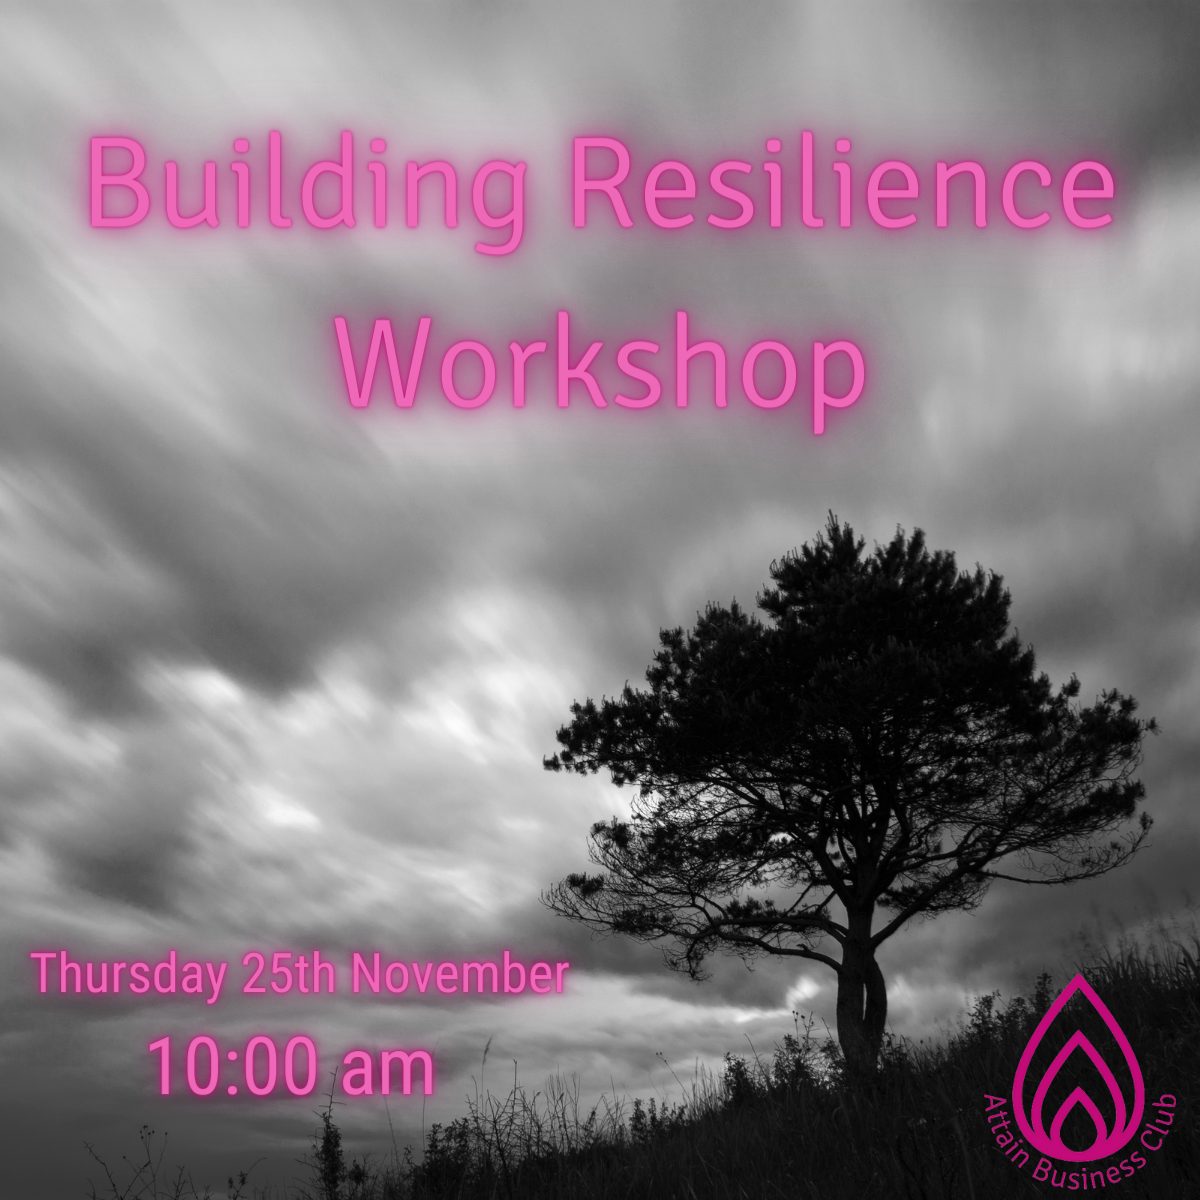 FREE Building Resilience Workshop 25th November 